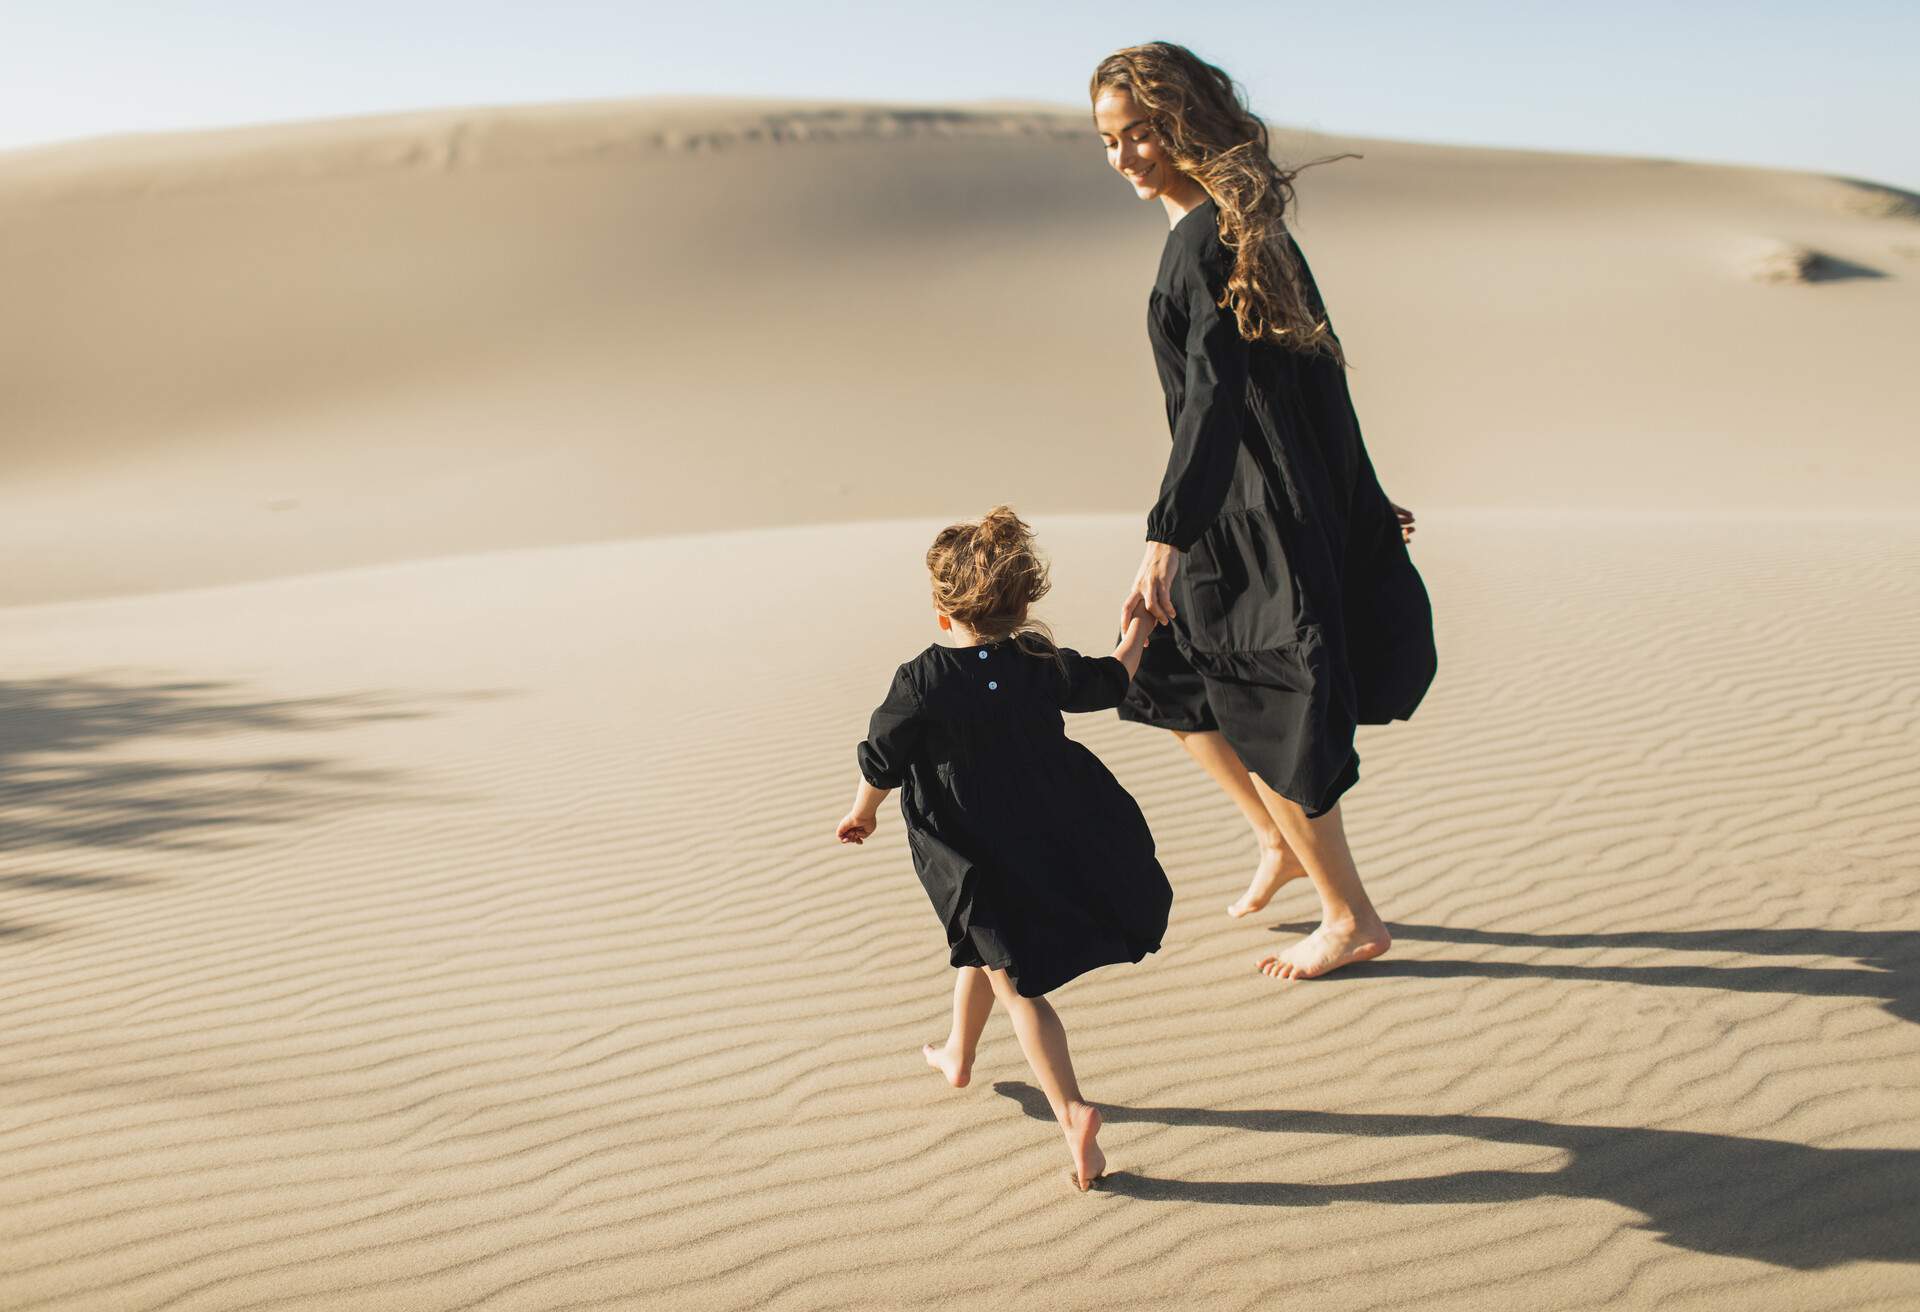 A mother and daughter strolling barefooted on sand dunes in the desert.